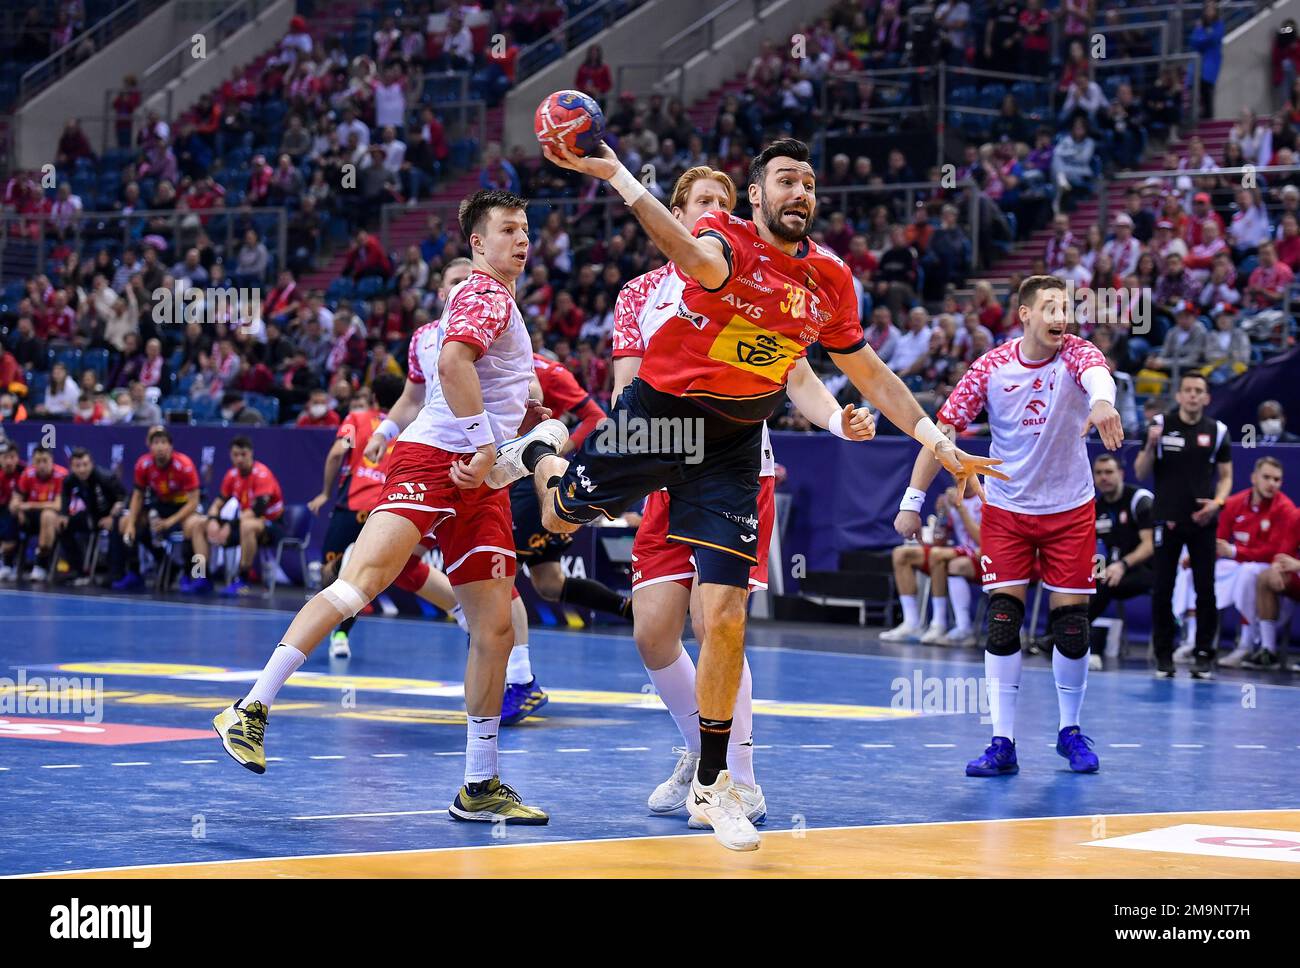 Cracow, Poland. 18th Jan, 2023. Gedeon Guardiola Villaplana during IHF Men's World Championship match between Poland and Spain on January 18, 2023 in Cracow, Poland. (Photo by PressFocus/Sipa USA) Credit: Sipa USA/Alamy Live News Stock Photo